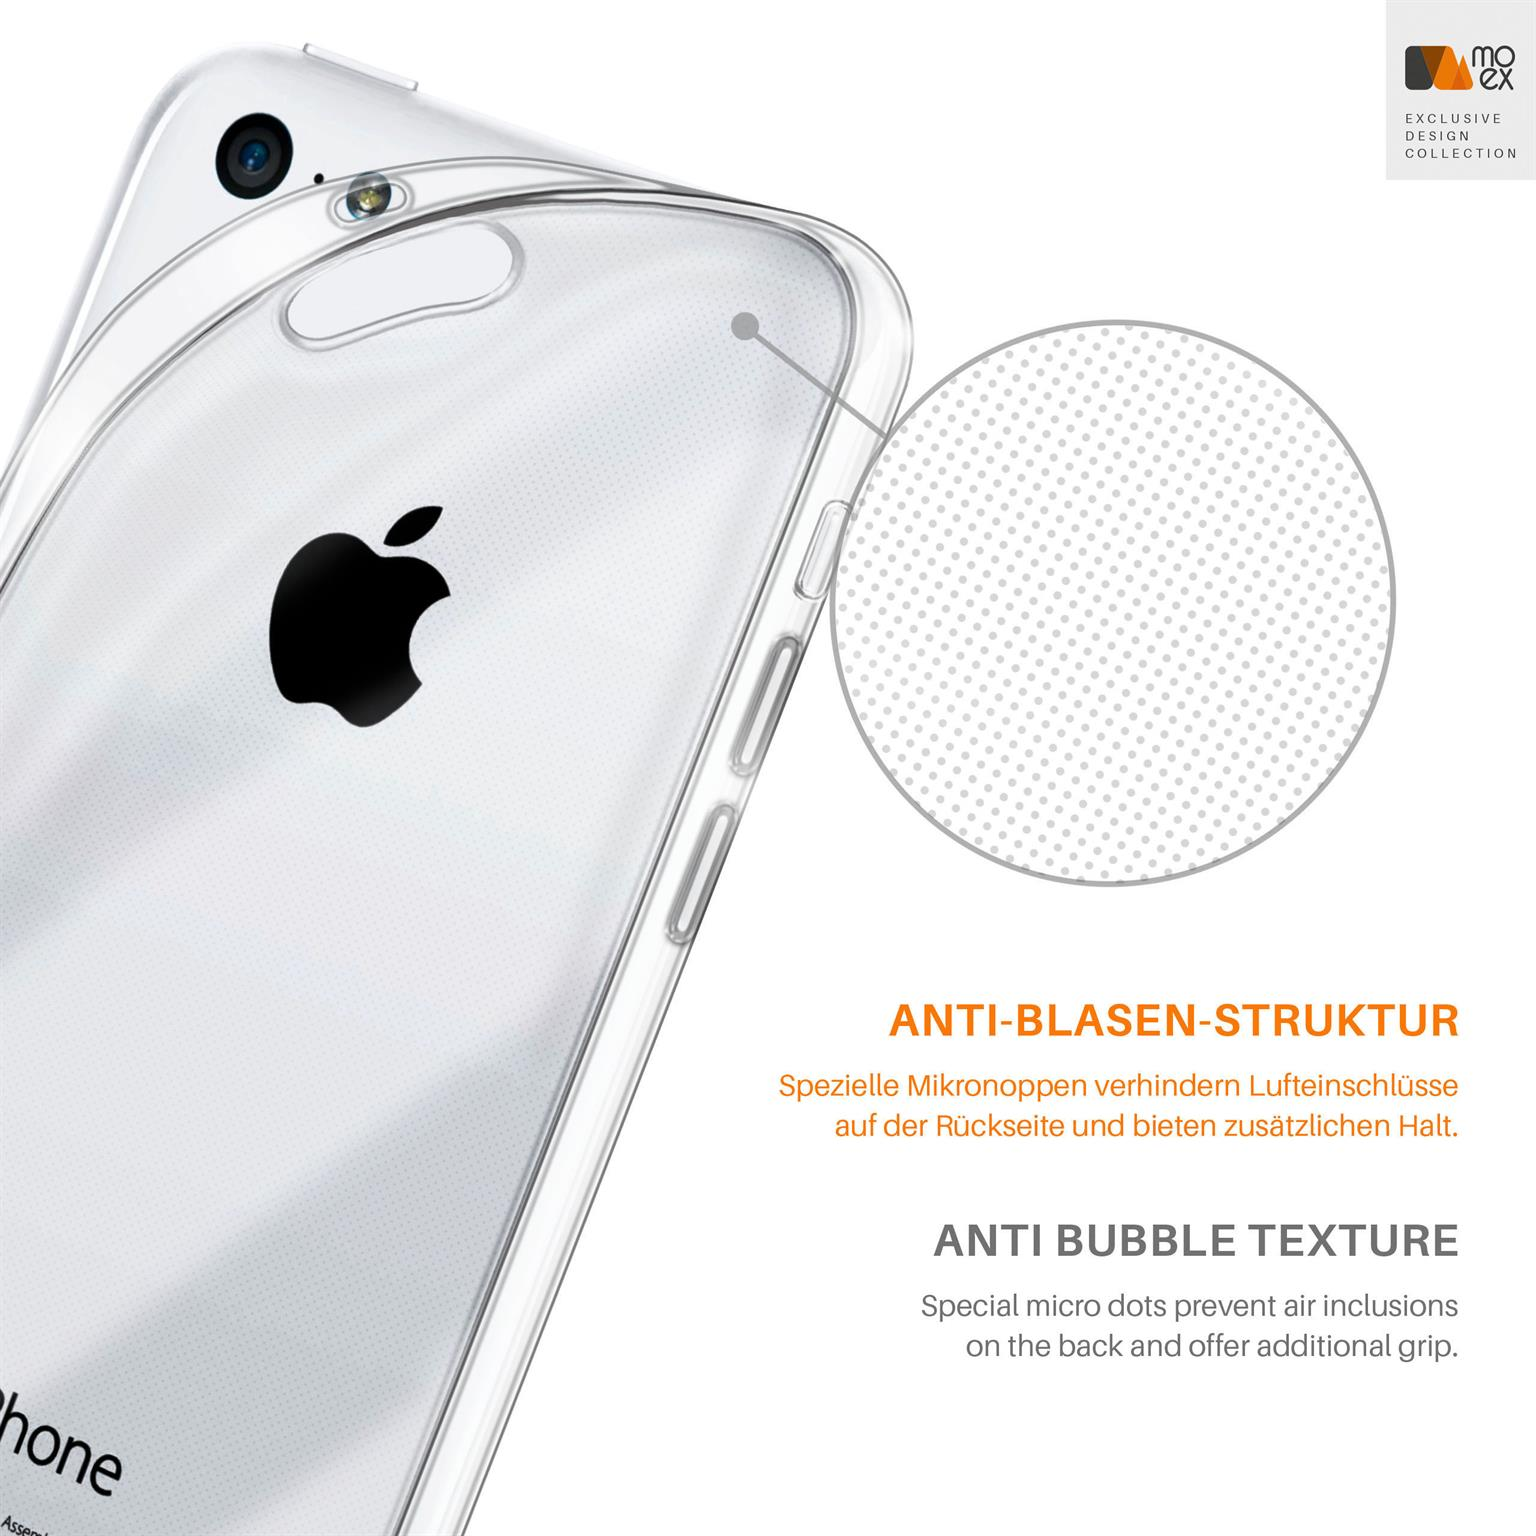 5c, MOEX Crystal-Clear Case, Backcover, Aero iPhone Apple,